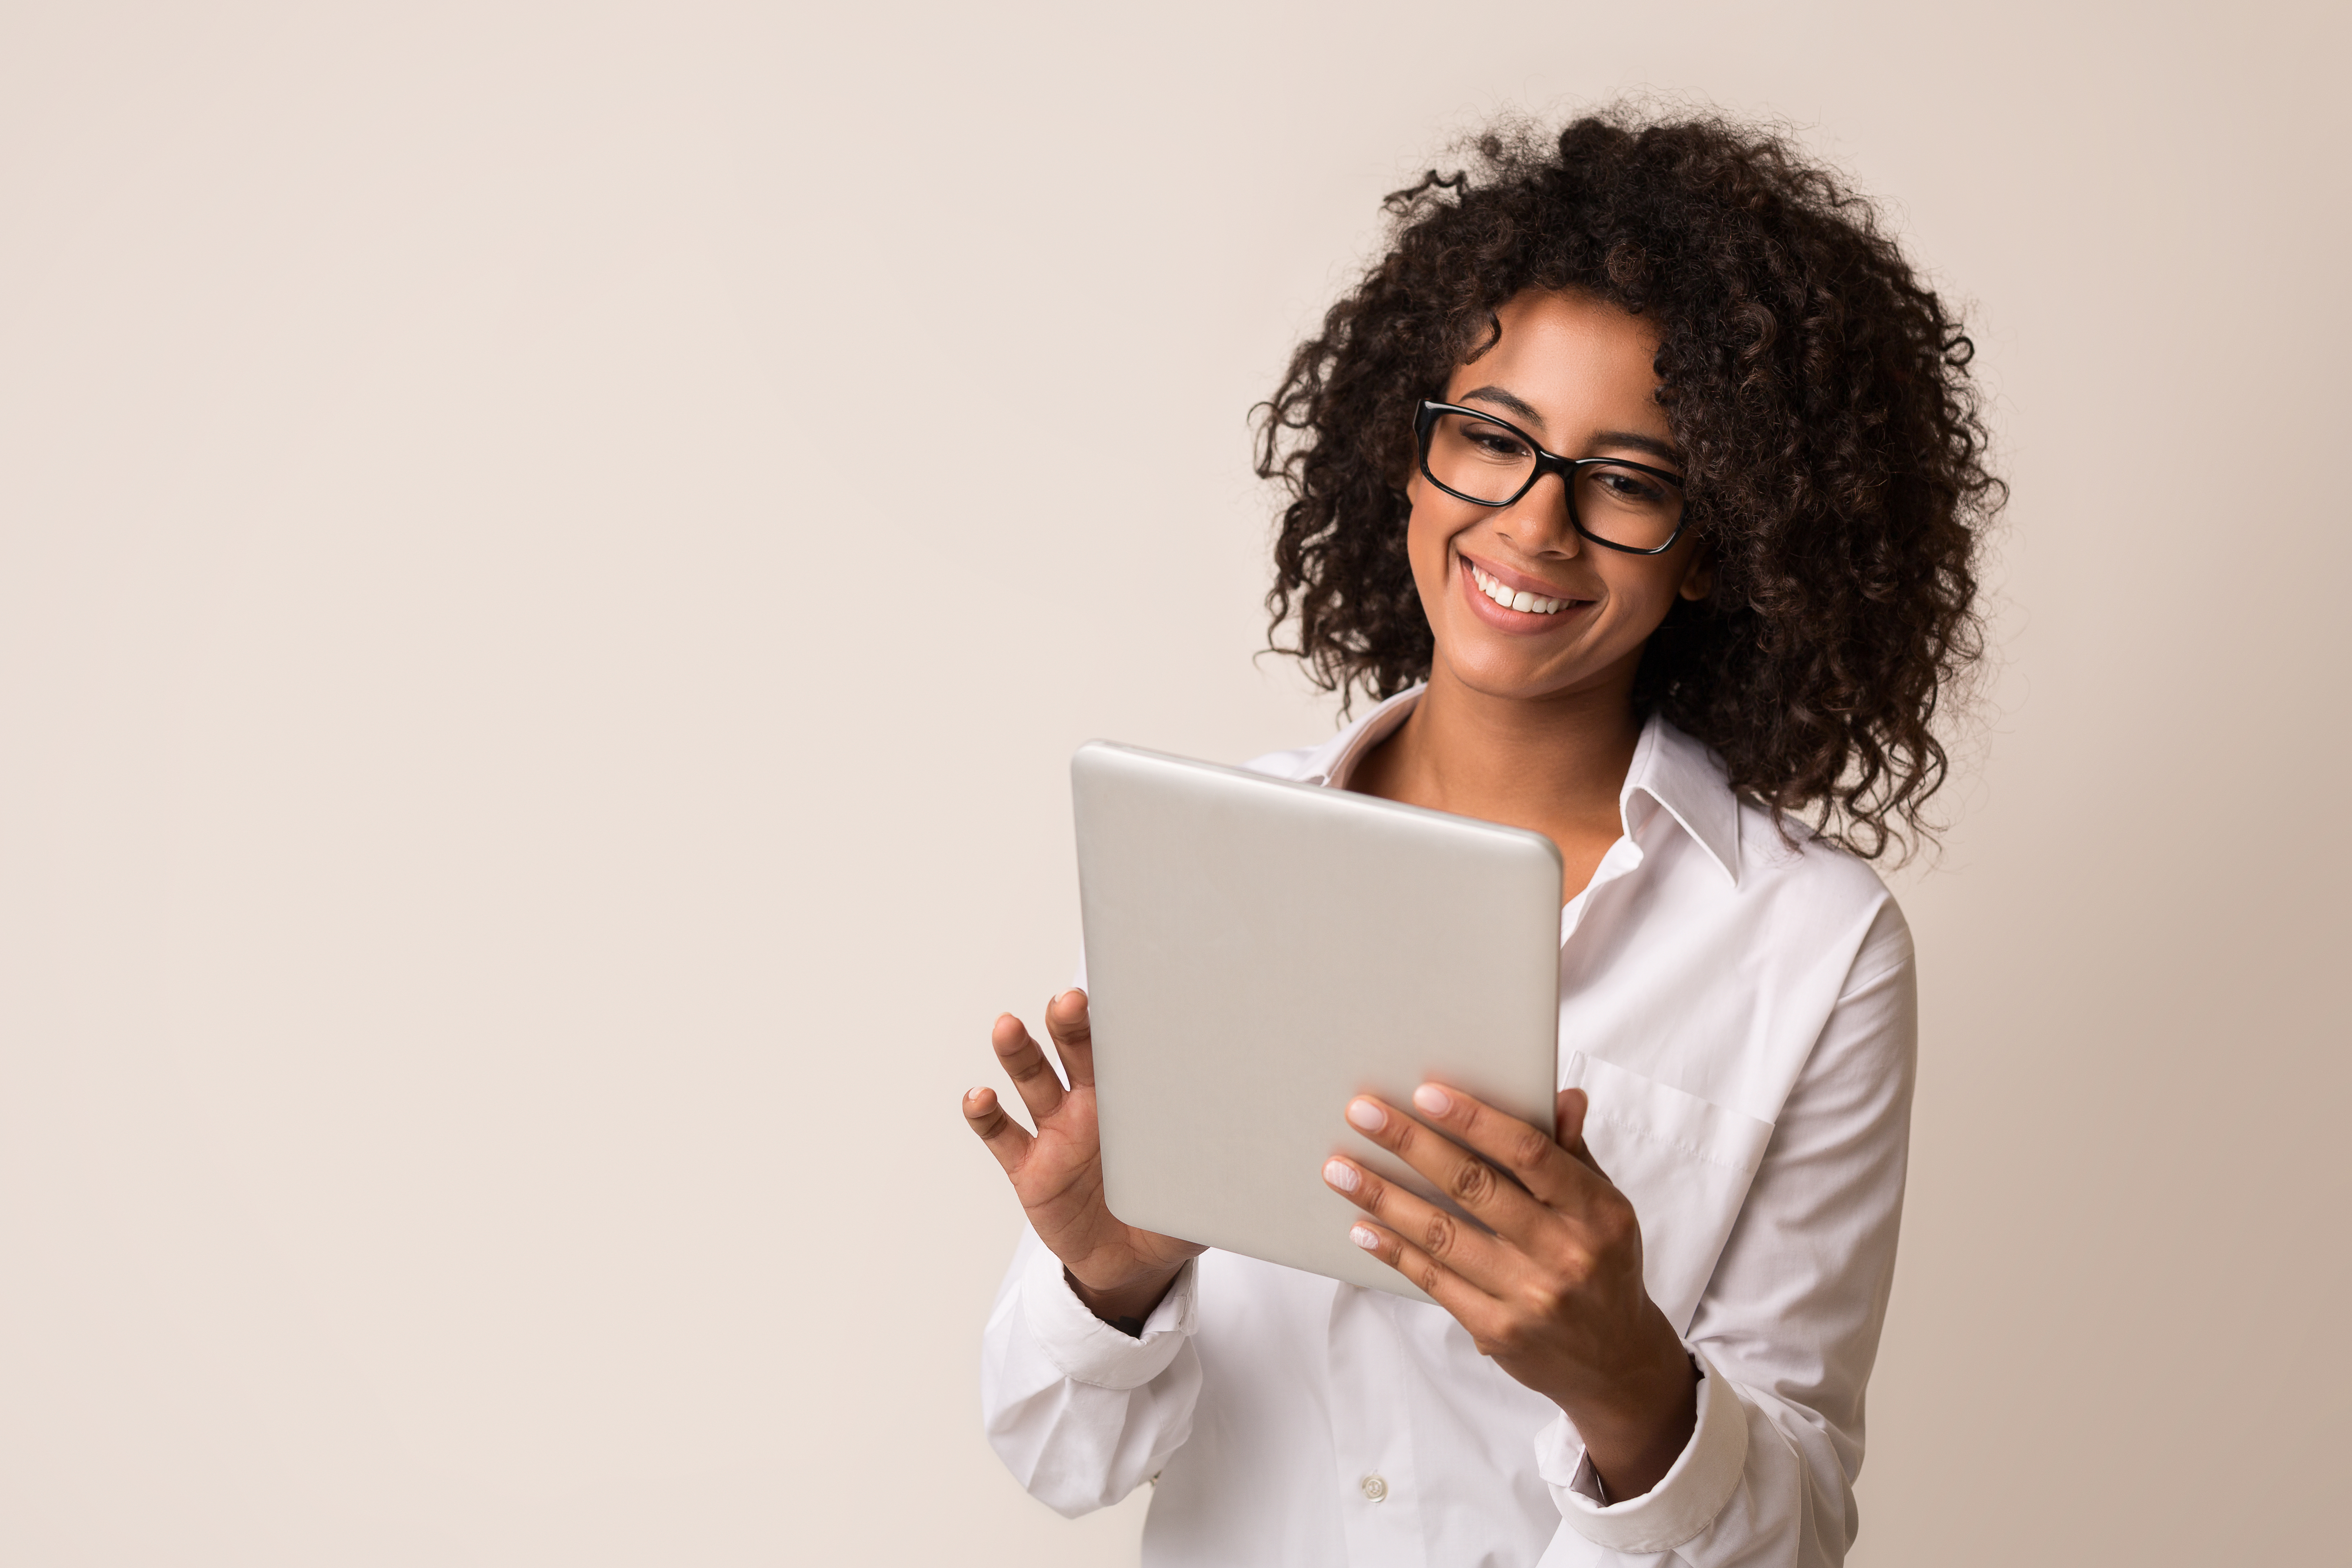 Woman wearing glasses and smiling while using a tablet